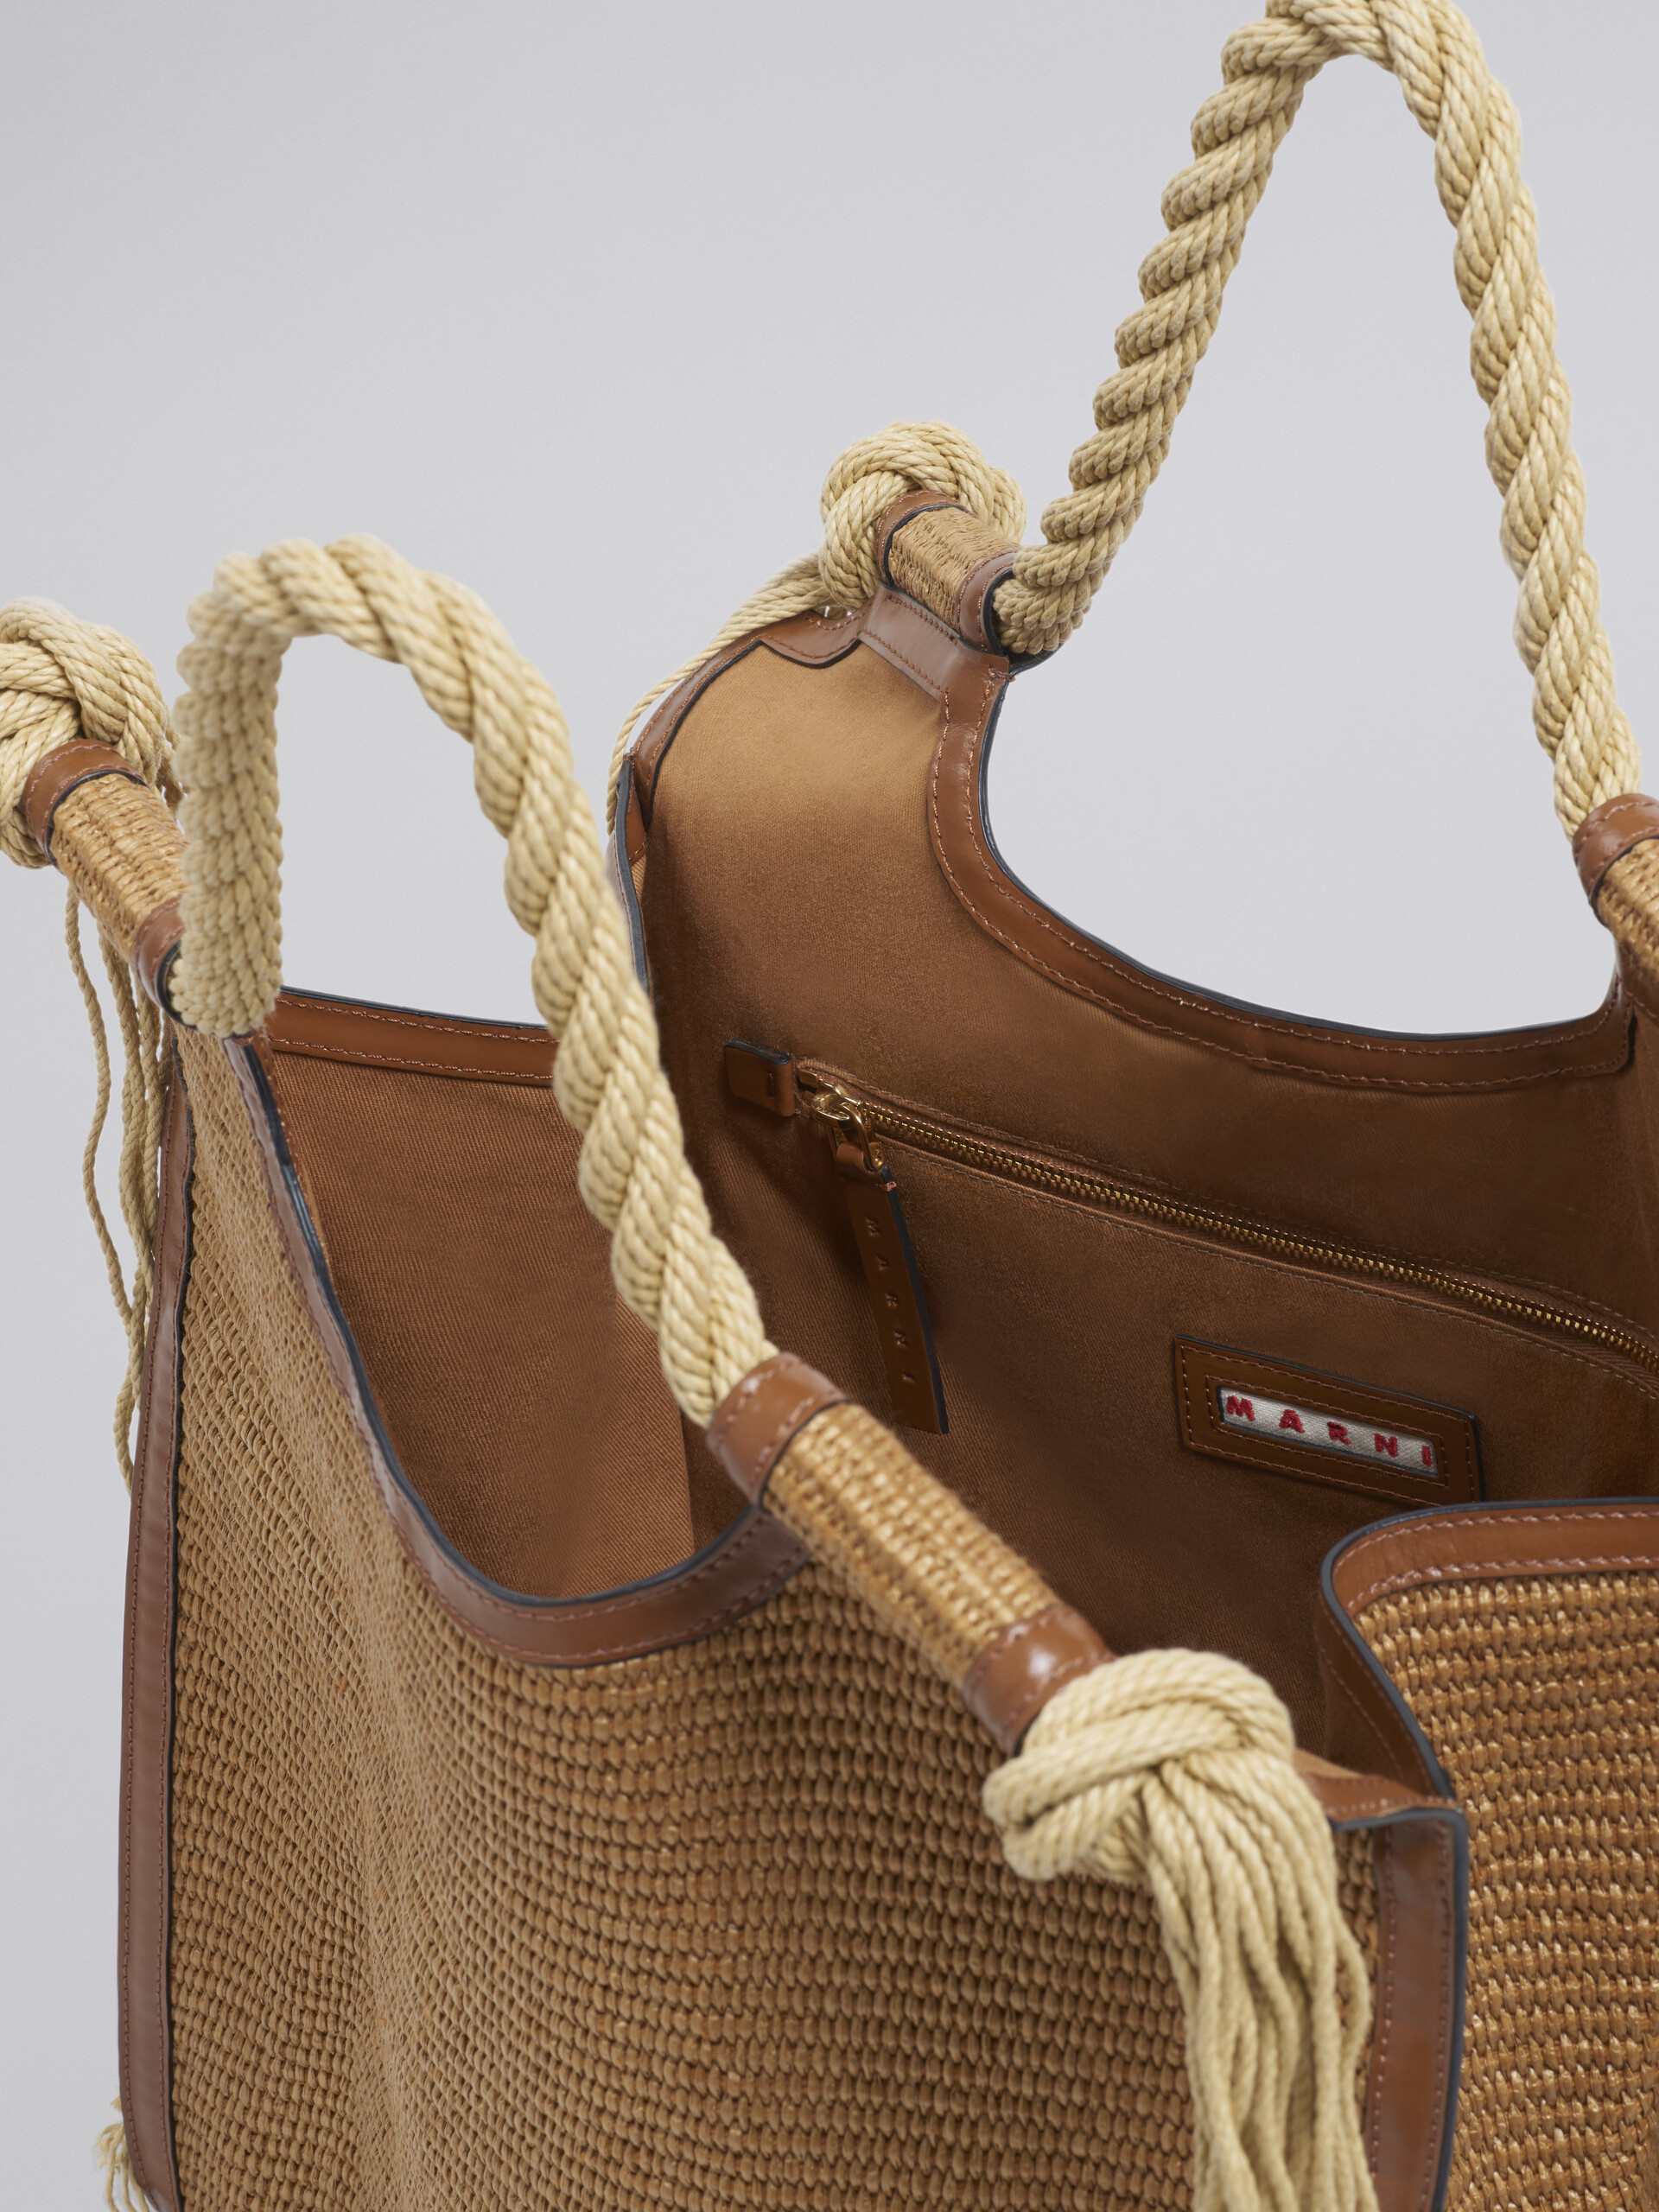 Marcel summer bag in brown leather and raffia with rope handles - Handbags - Image 4